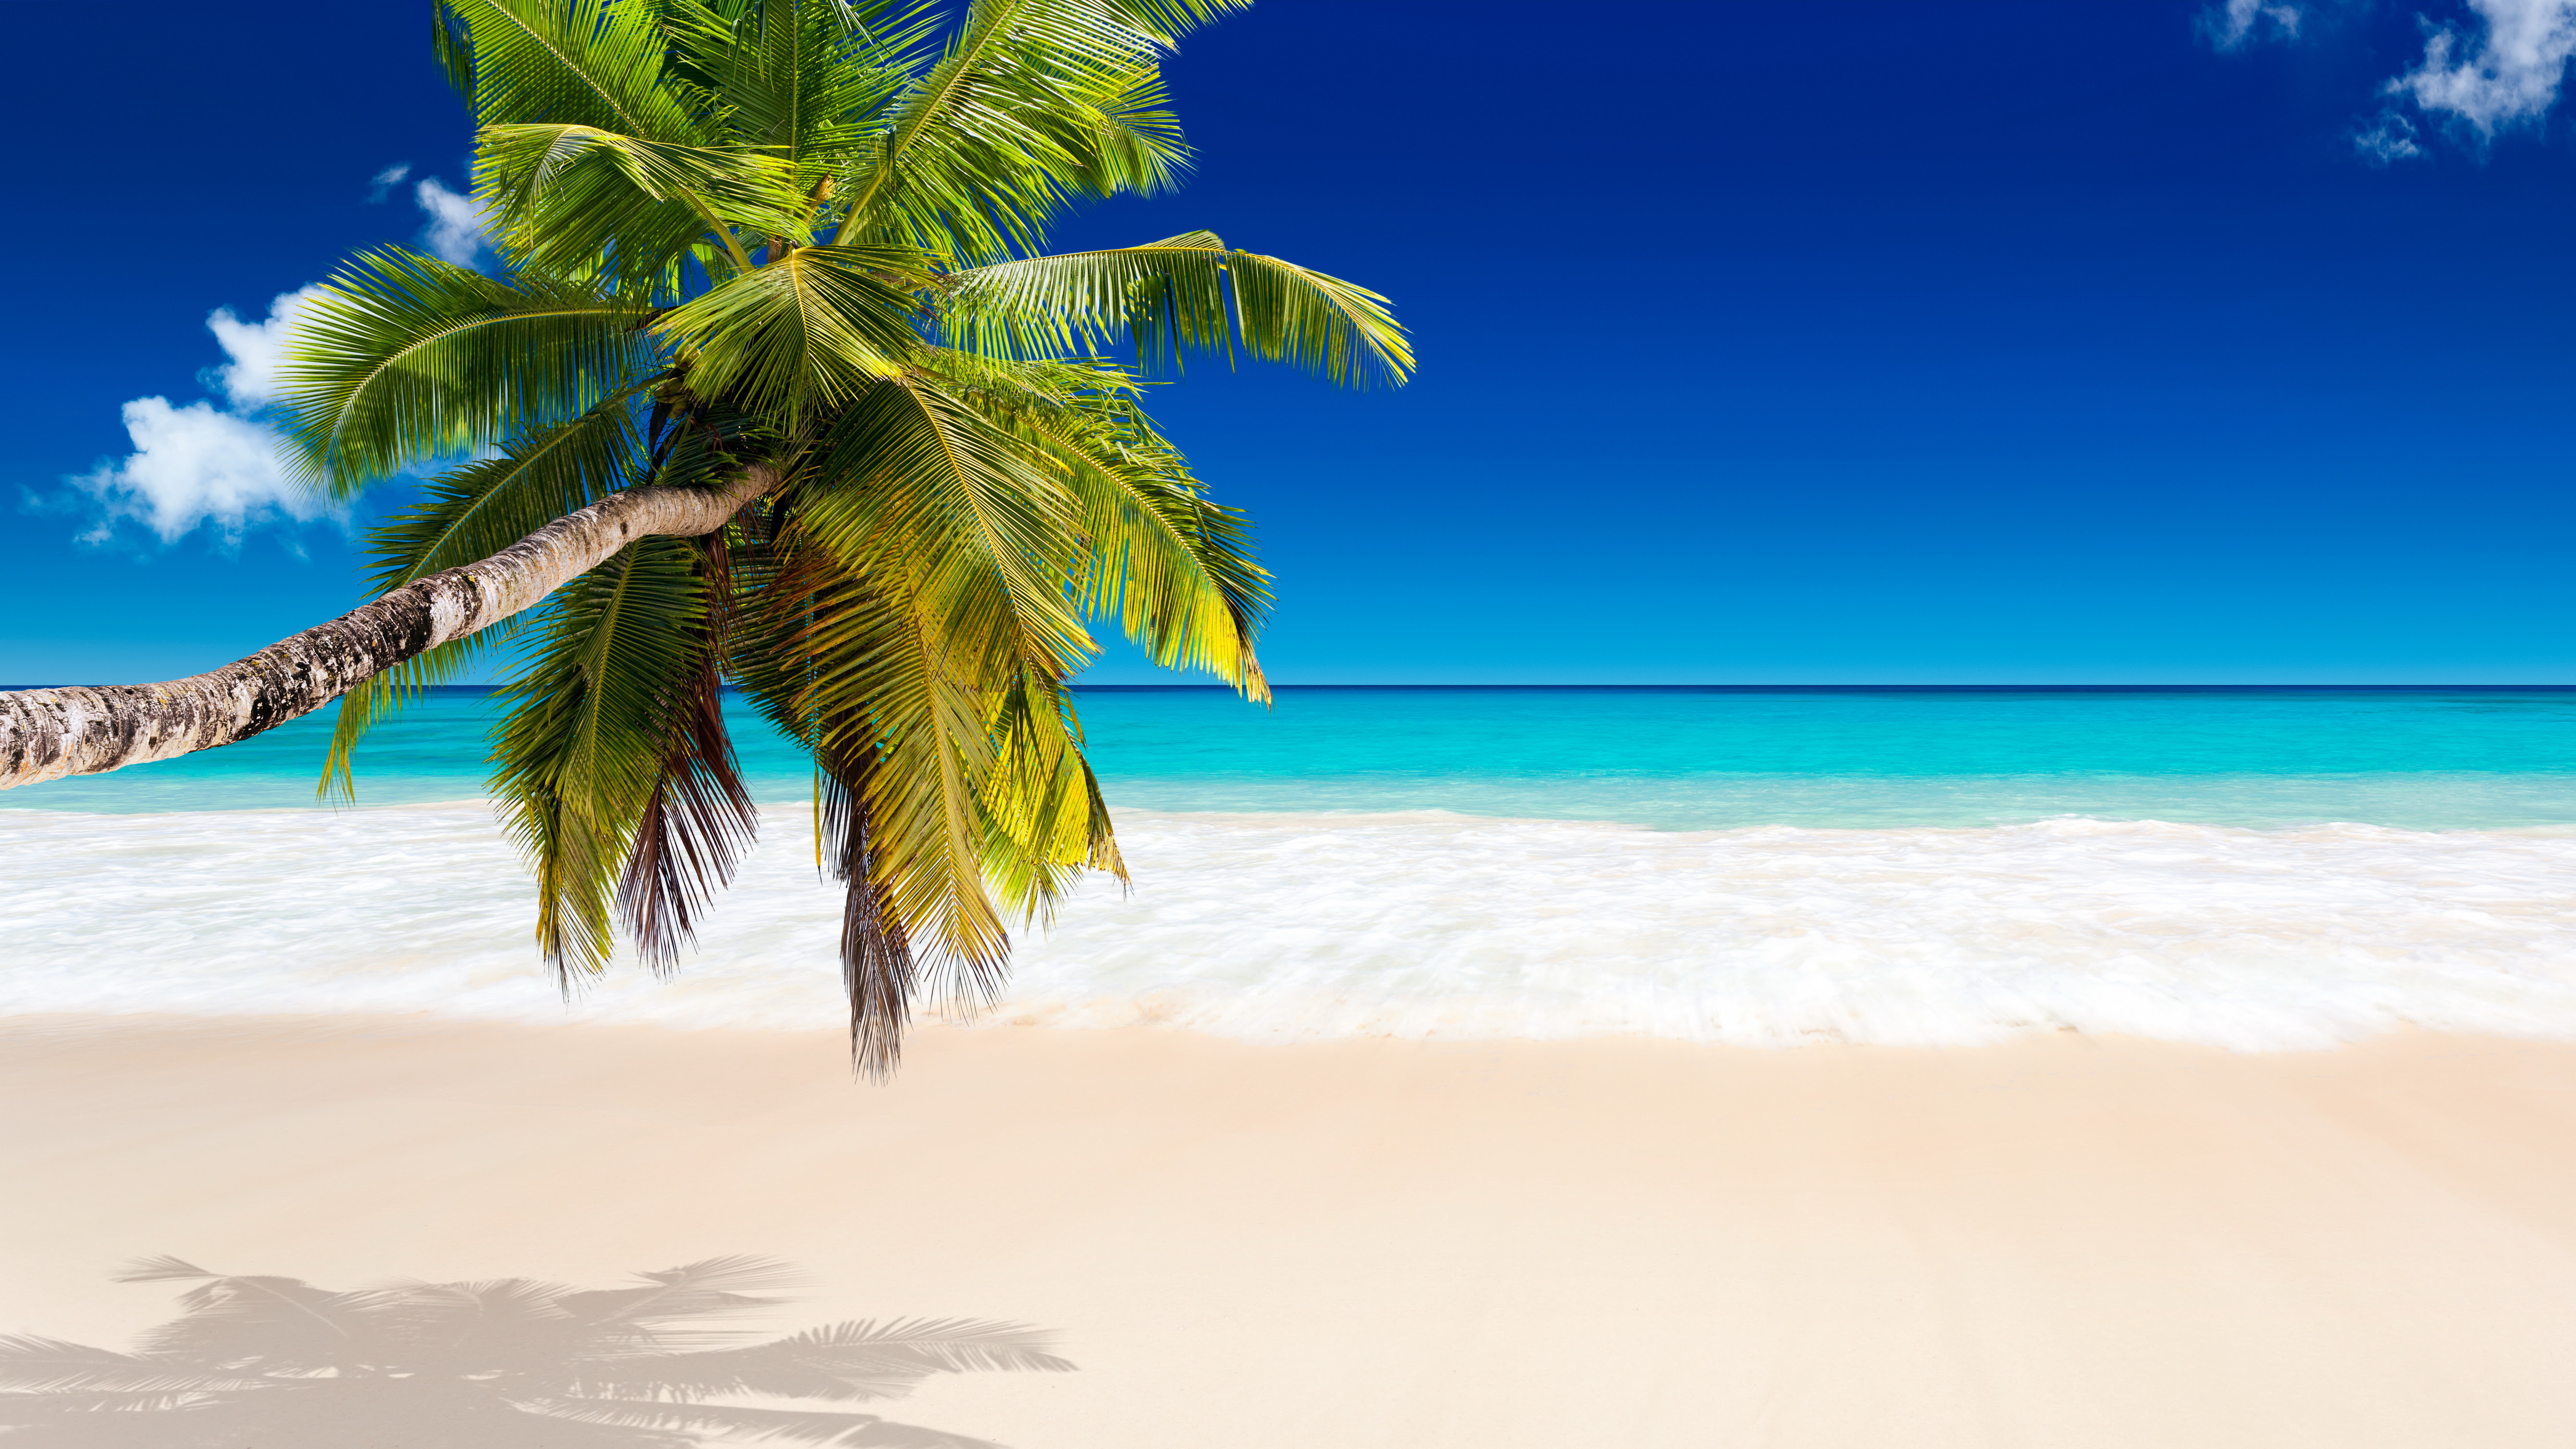 Tropical Beach Wallpapers, Pictures, Images